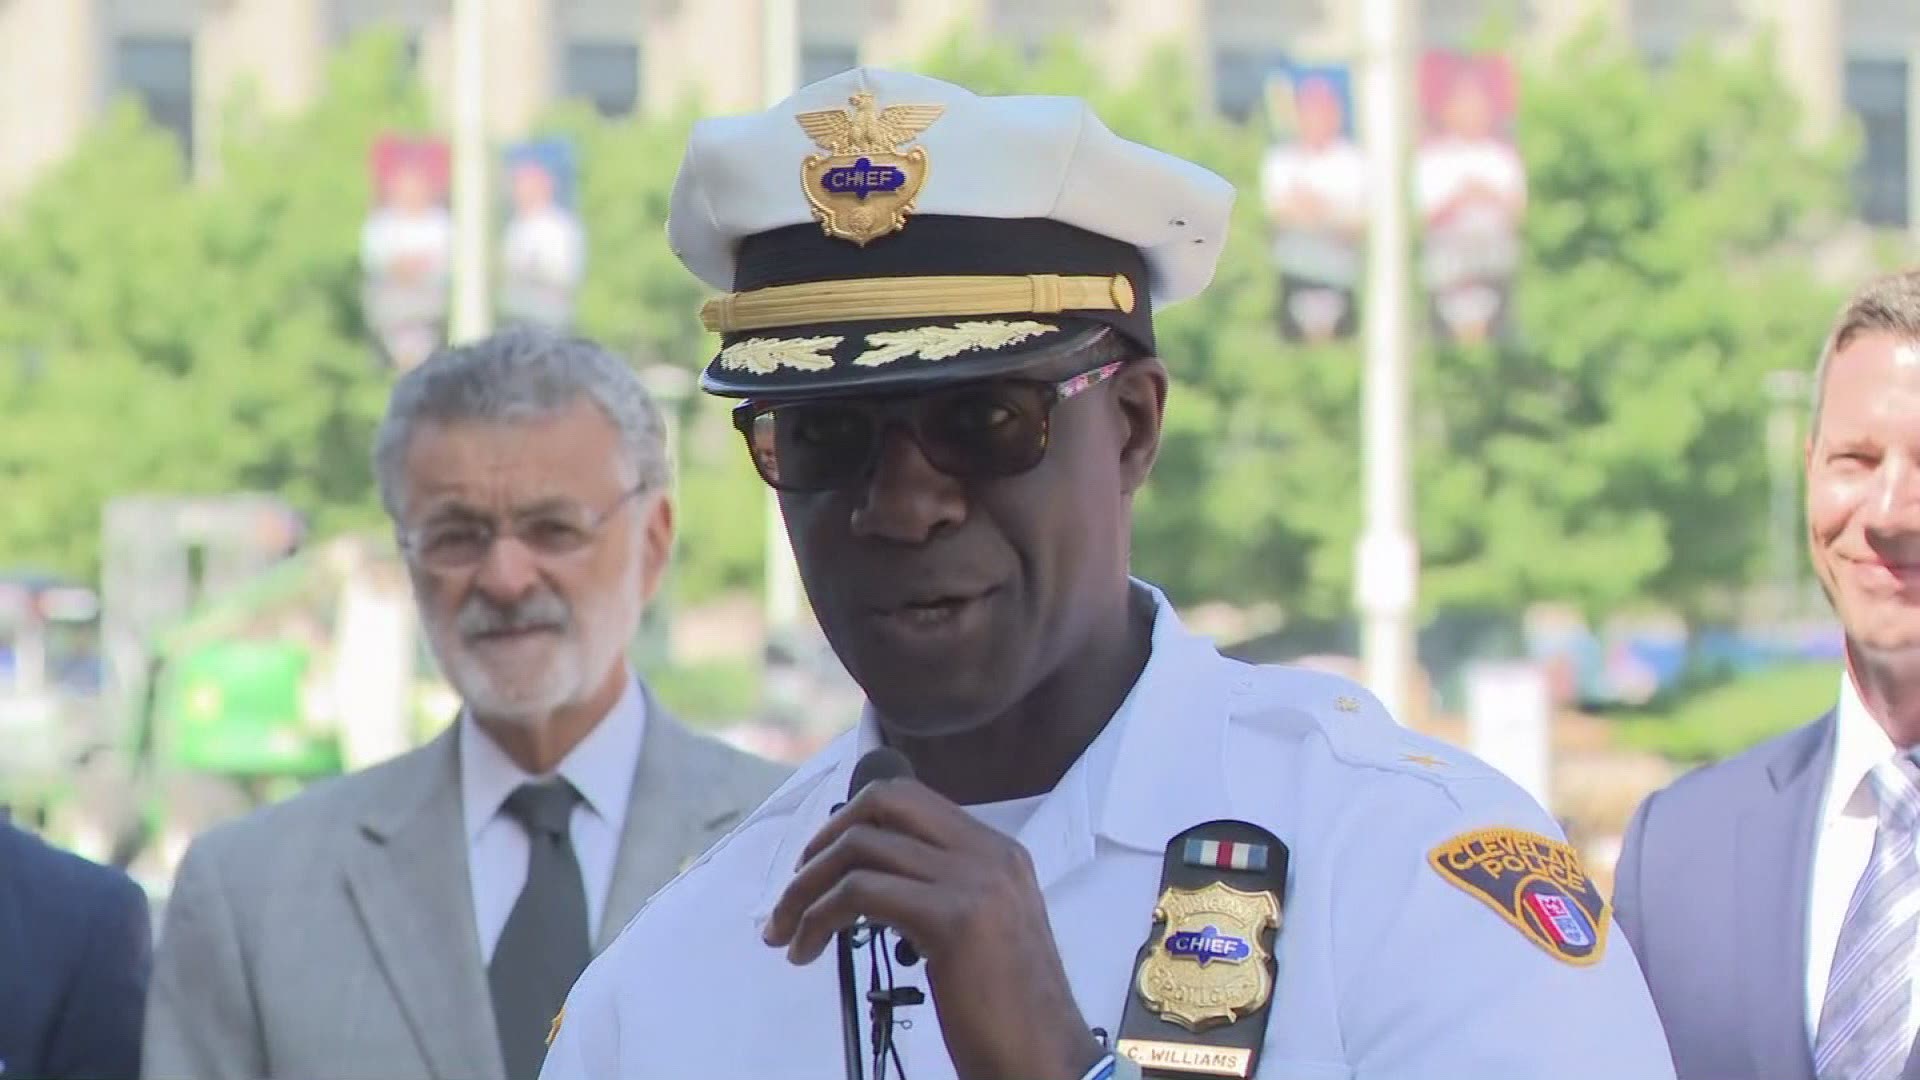 Cleveland Police Chief Calvin Williams discusses the safety plan for MLB All-Star Week in Cleveland. The 90th MLB All-Star Game takes place July 9.